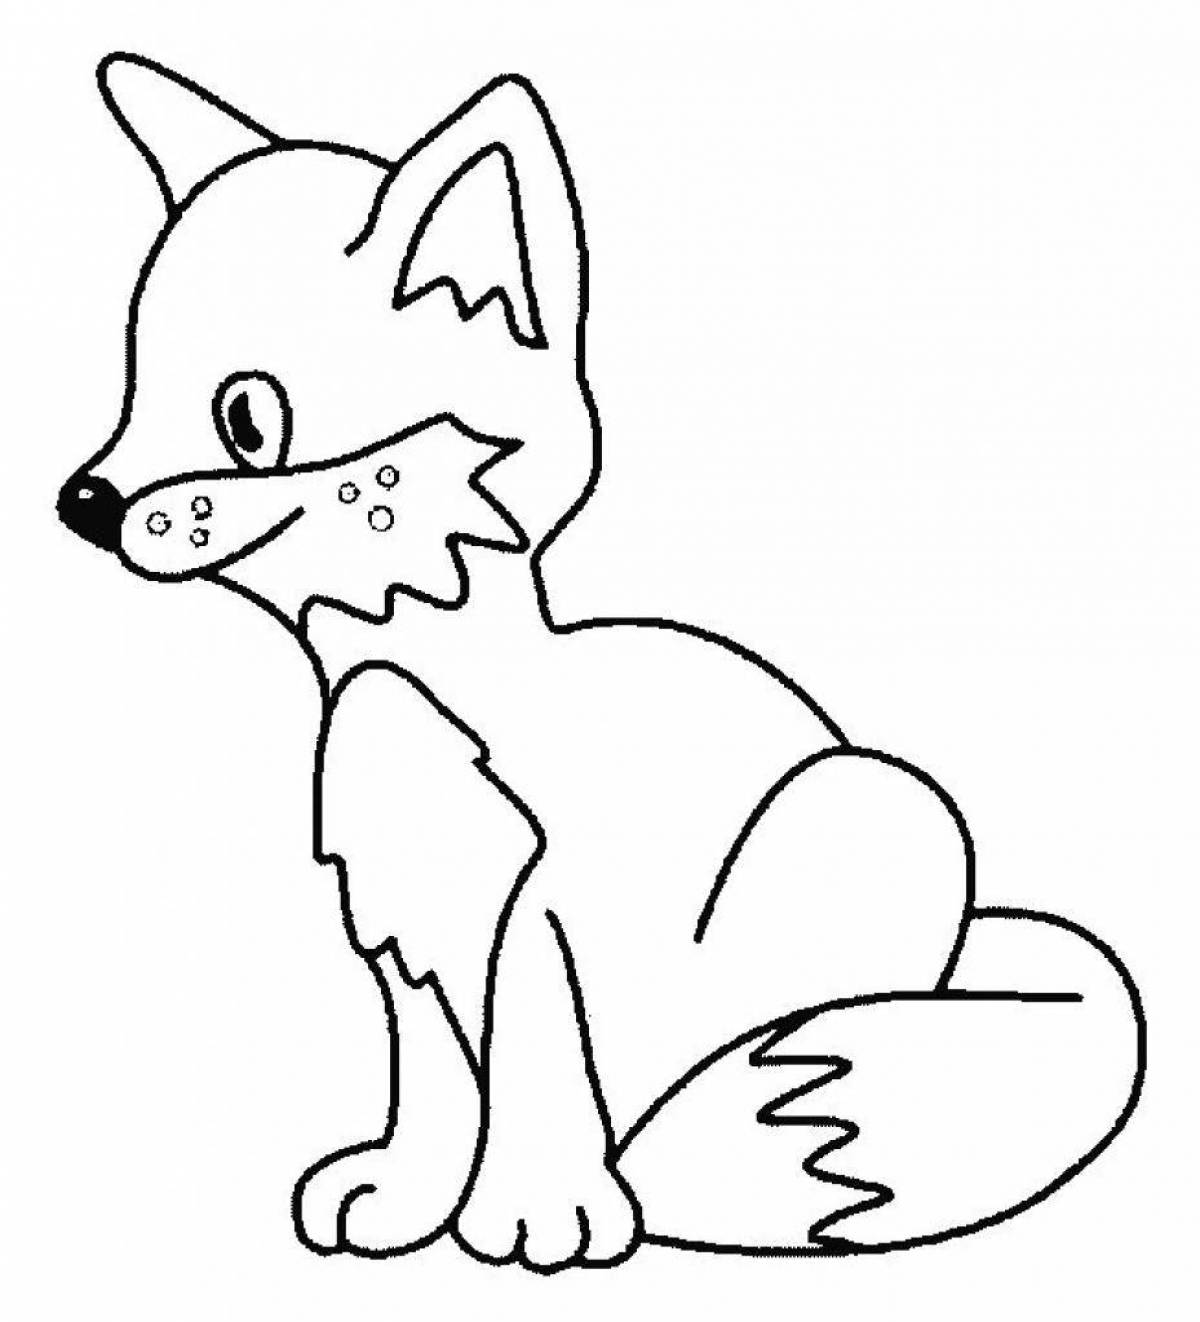 Adorable fox coloring book for children 4-5 years old